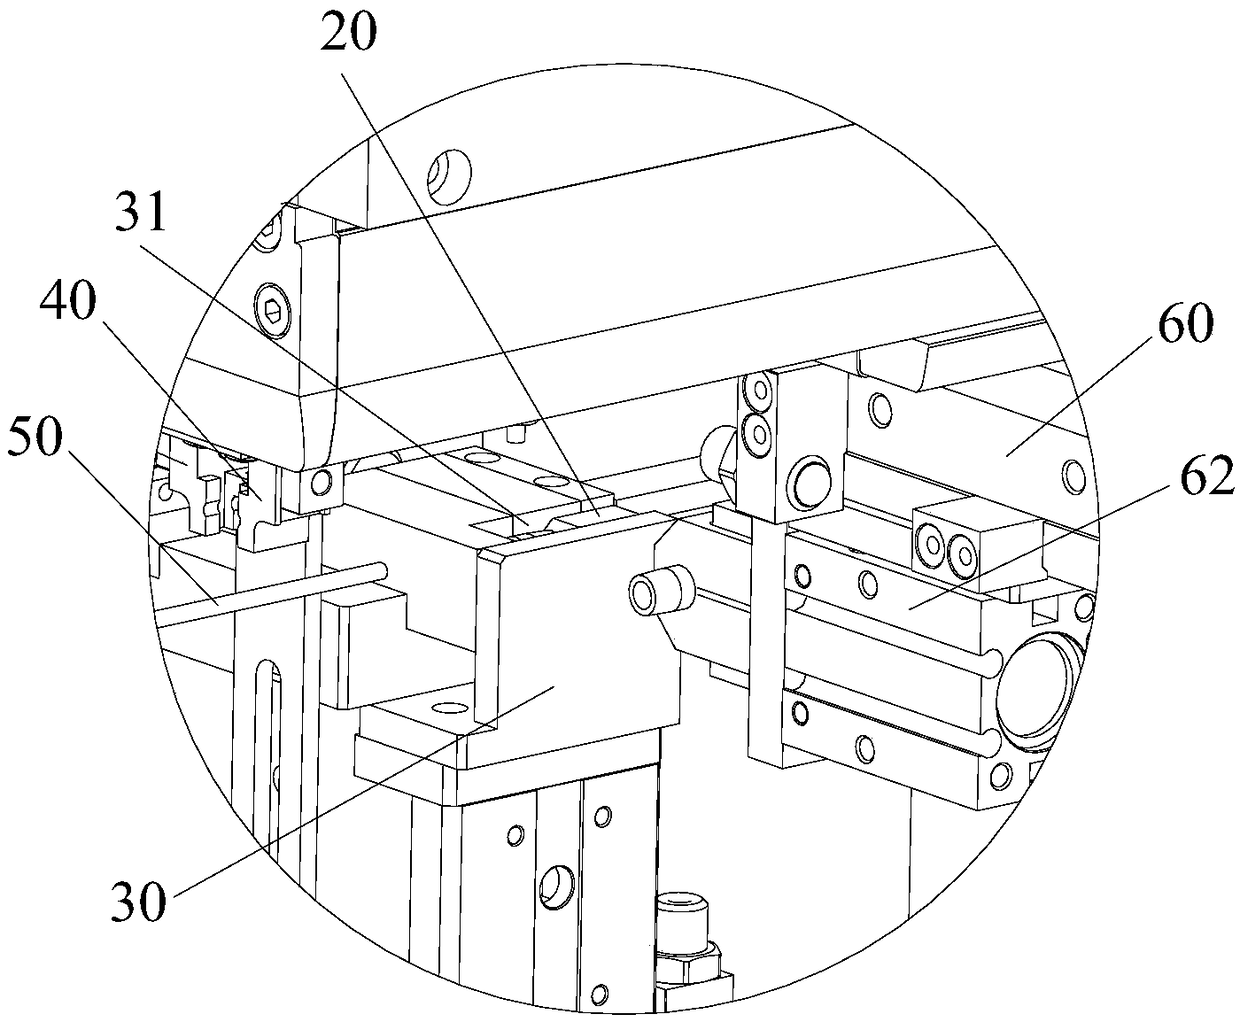 Power cord assembly apparatus